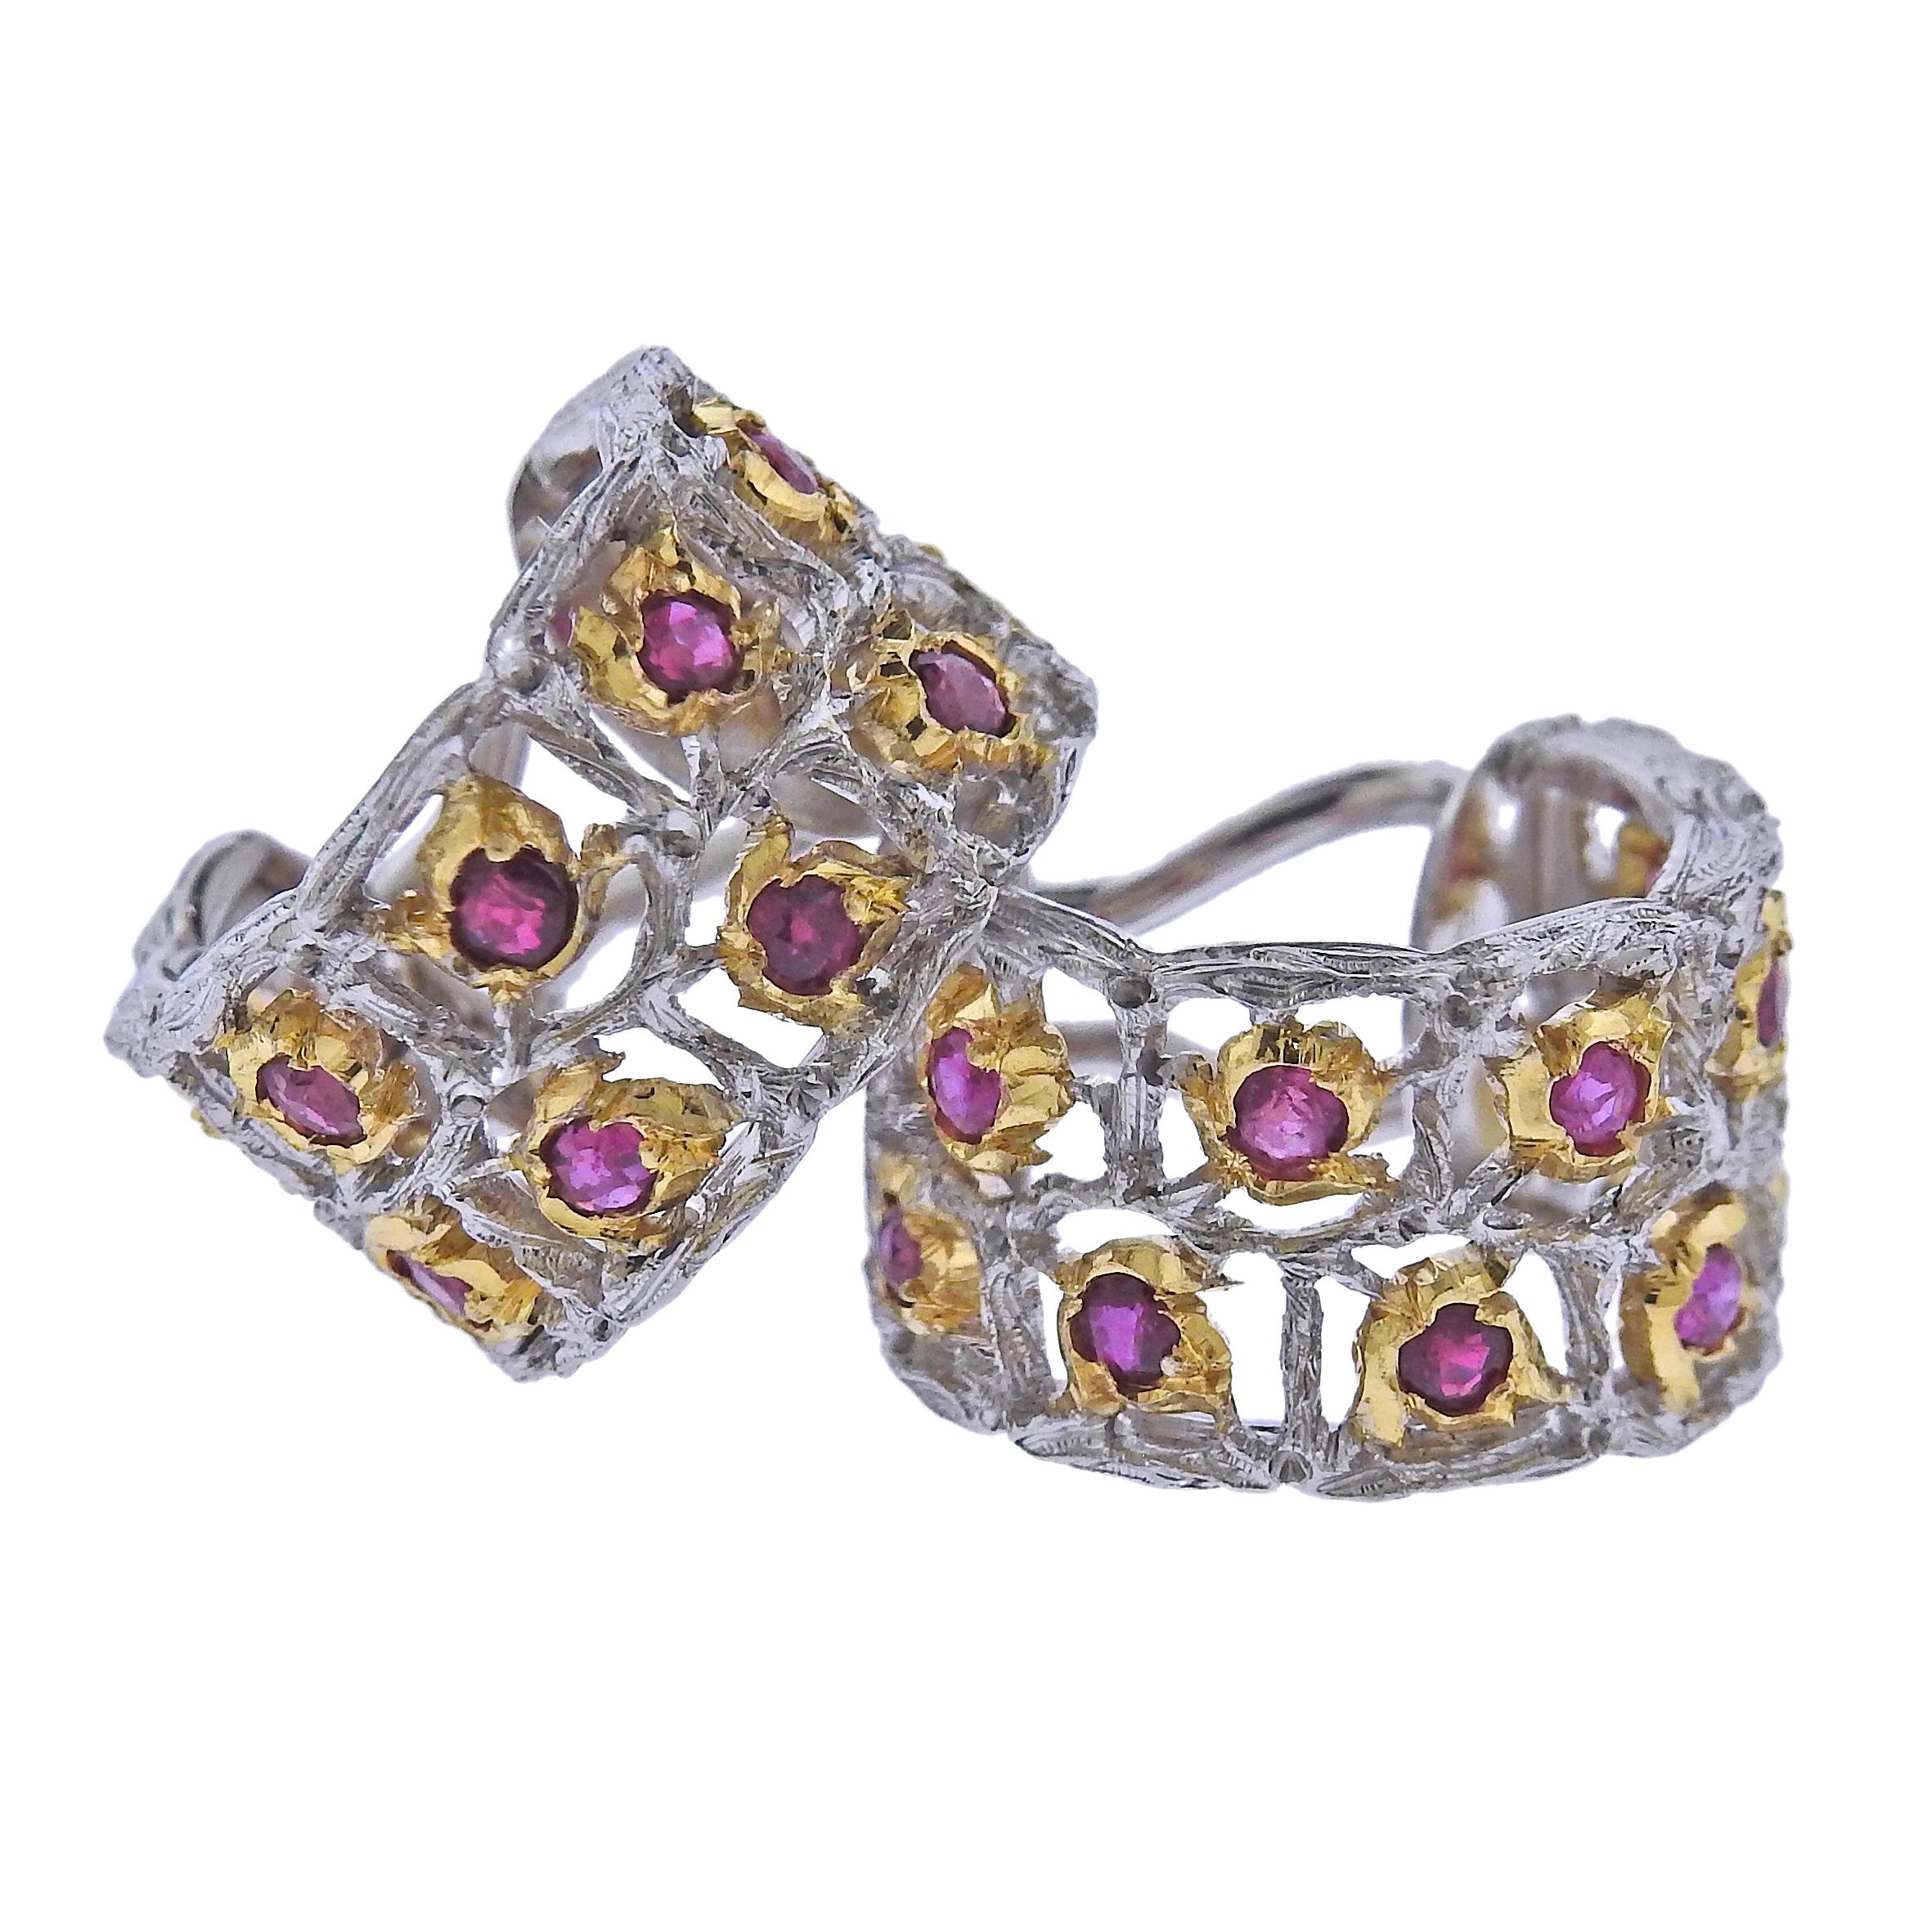 A pair of wide 18k white and yellow gold hoop earrings, crafted by Buccellati, decorated with ruby gemstones. Earrings are 17mm in diameter and 10.5mm wide . Marked: Buccellati Italy 18k. Weight - 10.2 grams 